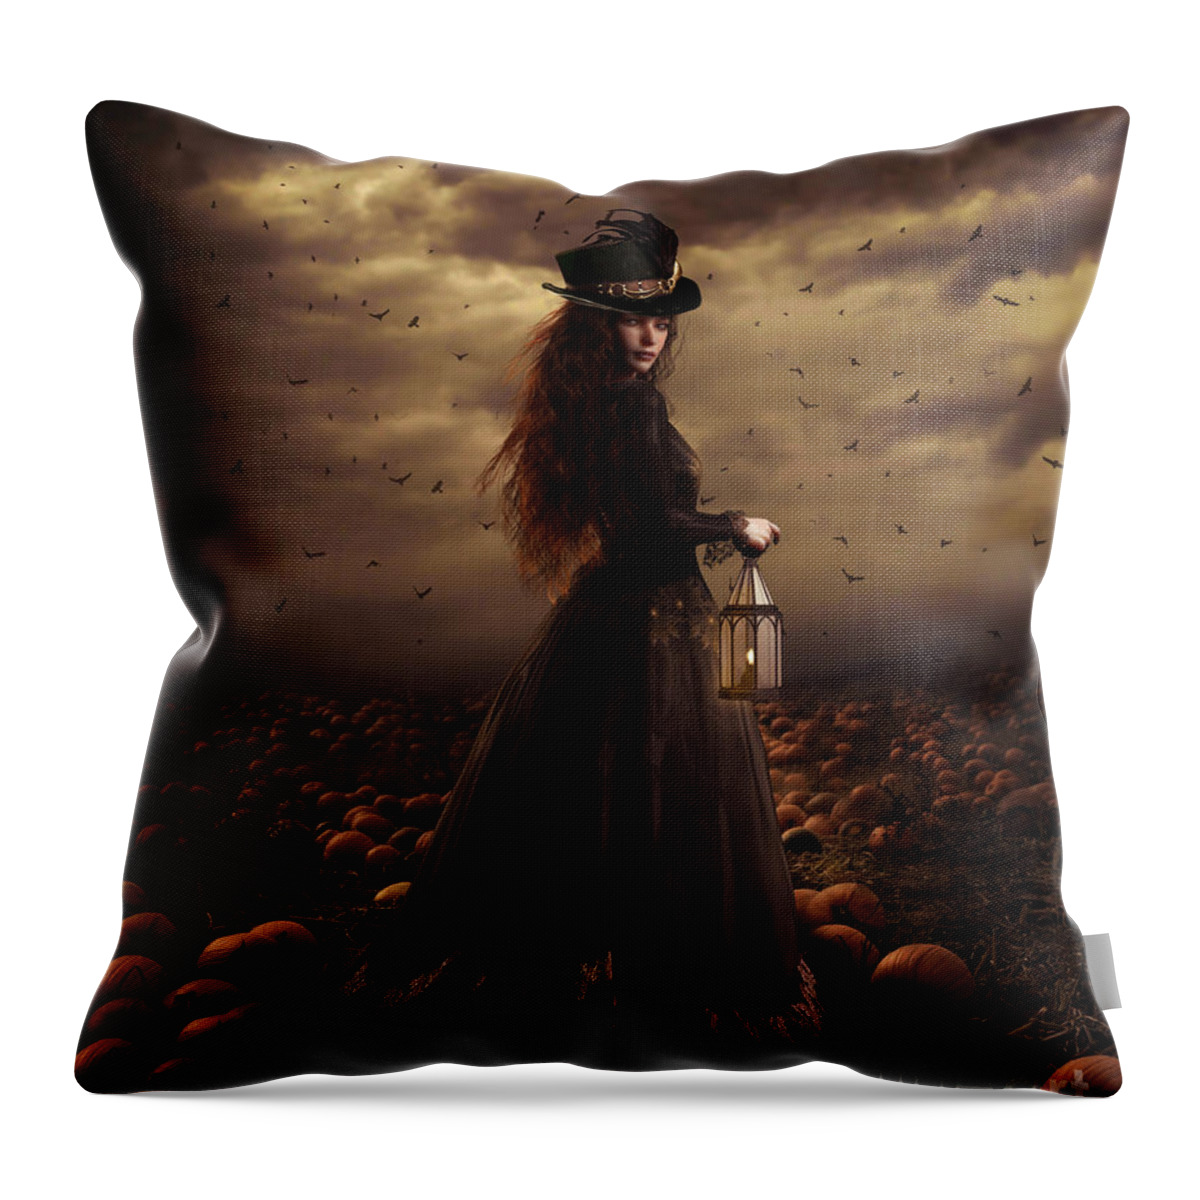 Illustration Throw Pillow featuring the digital art The Pumpkin Patch by Shanina Conway